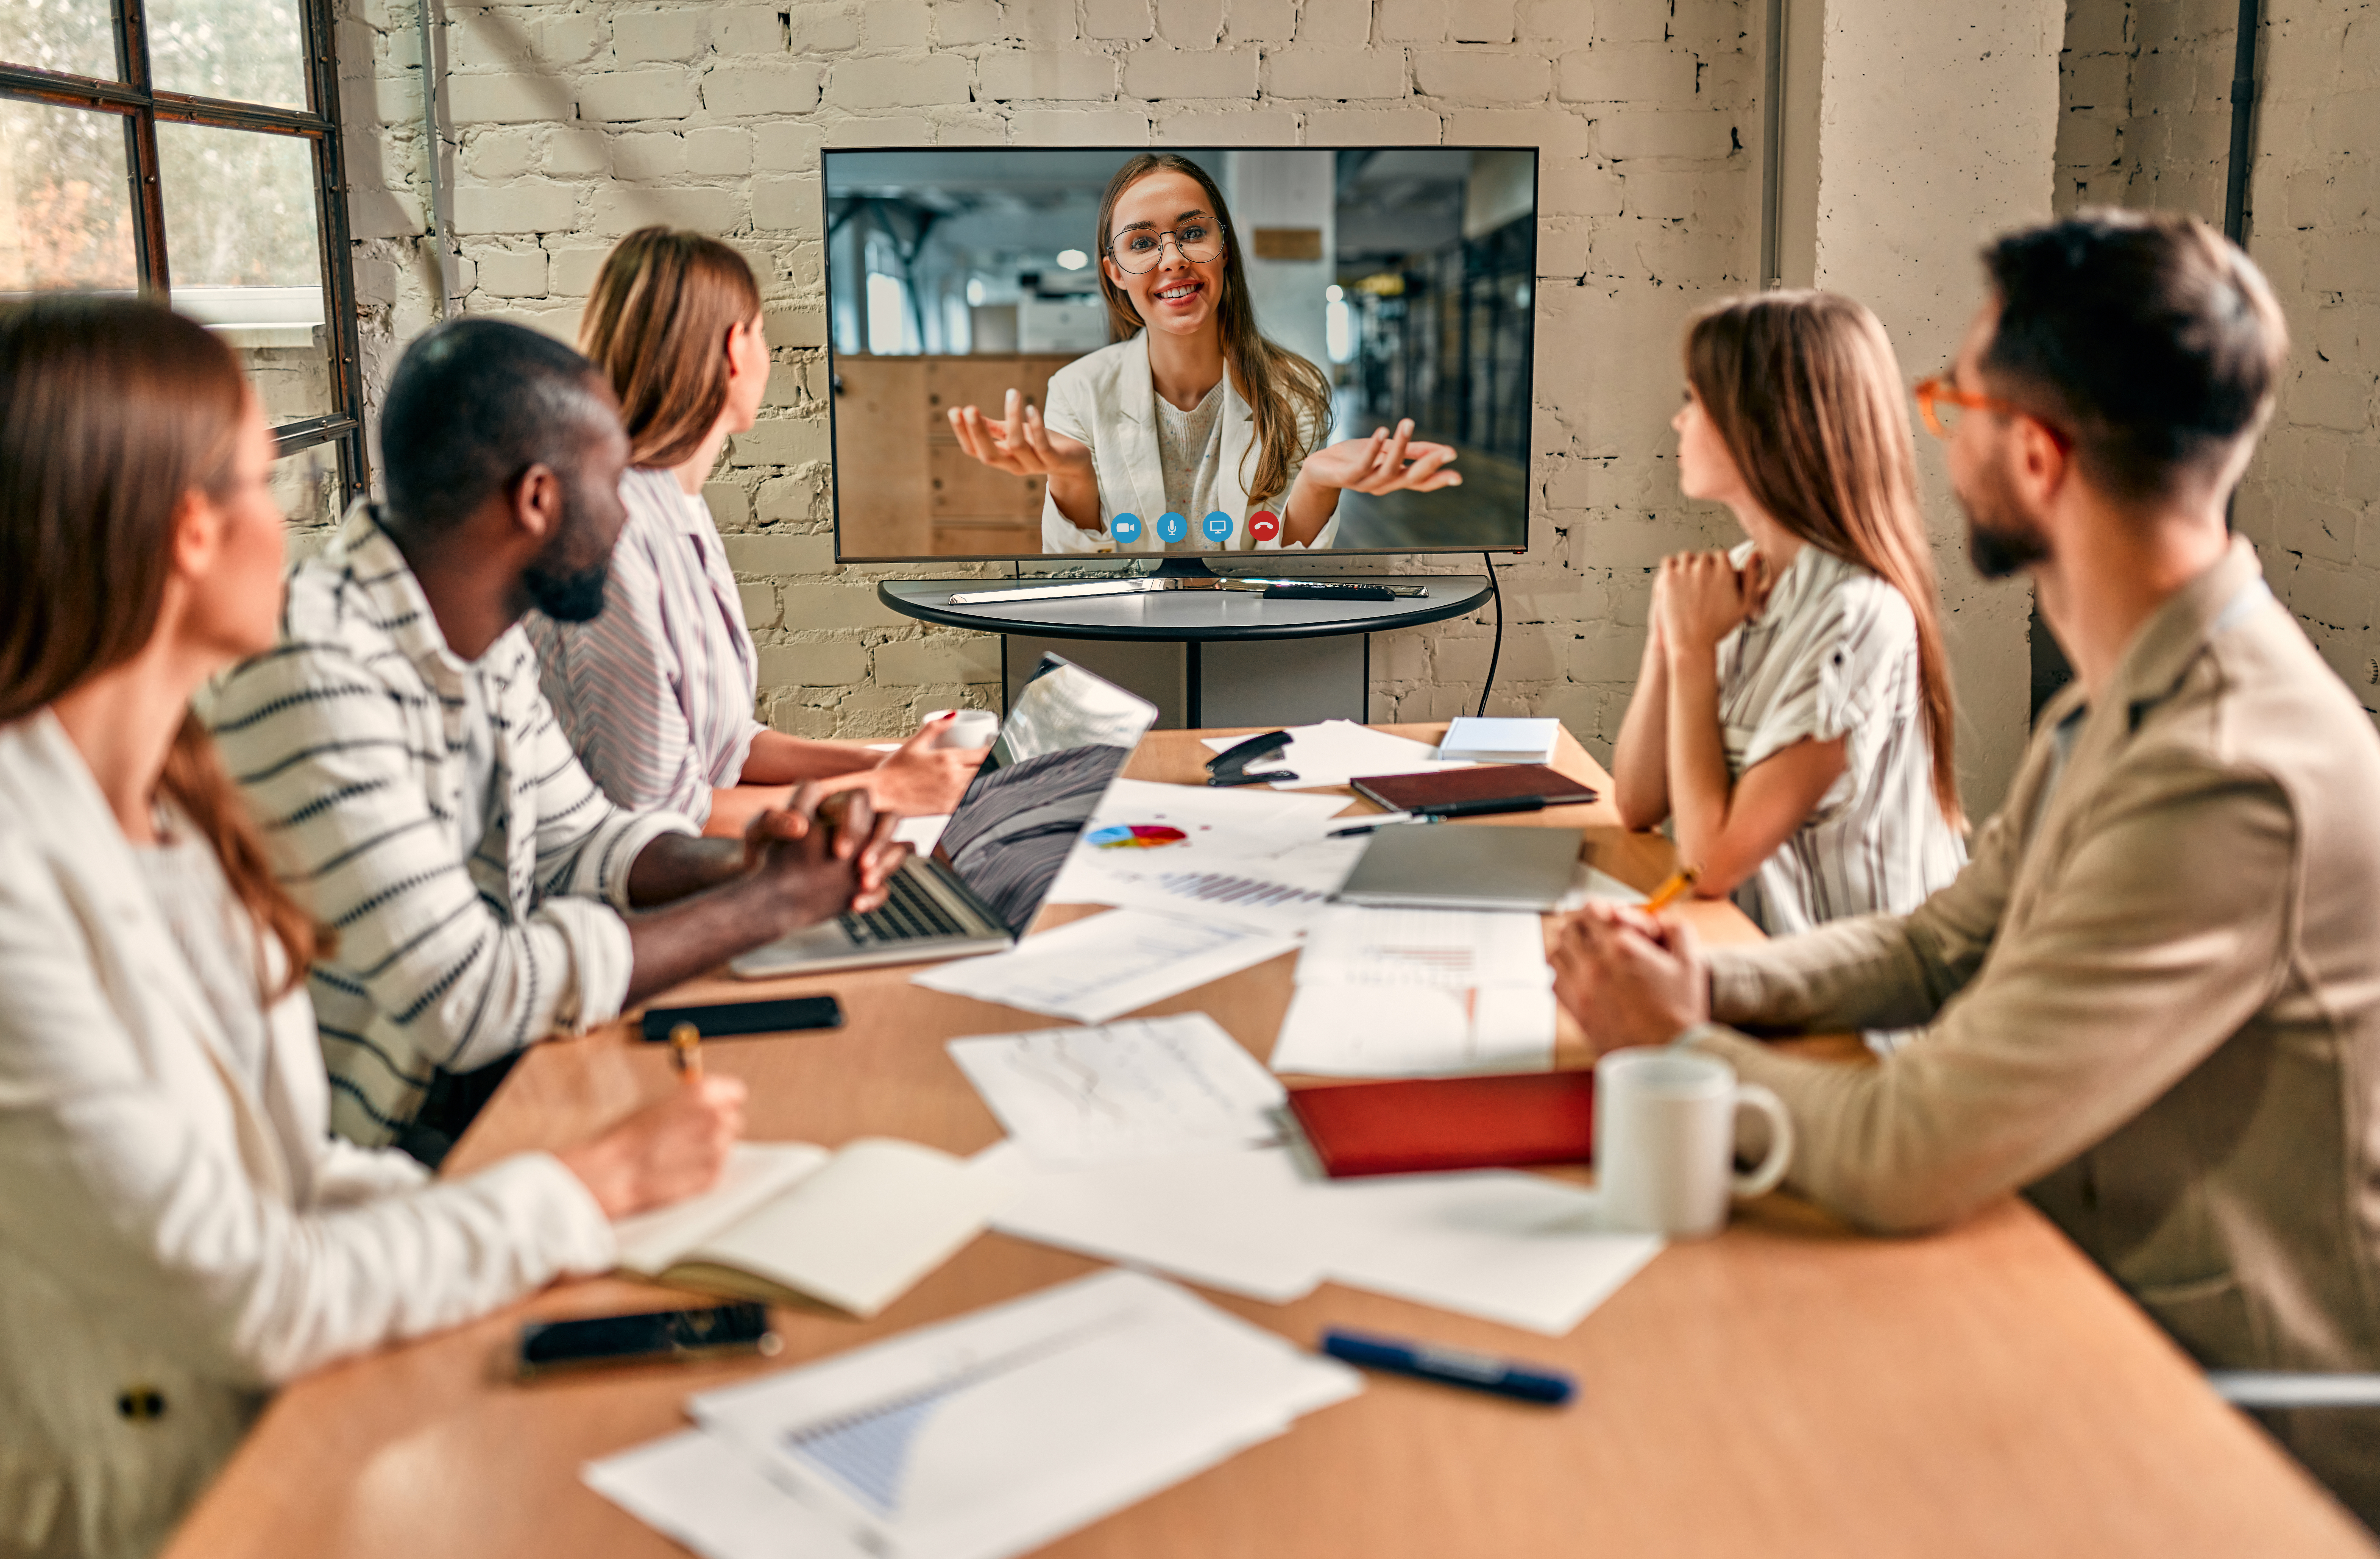 Enhance your Video Collaboration teams with on-site staff and training